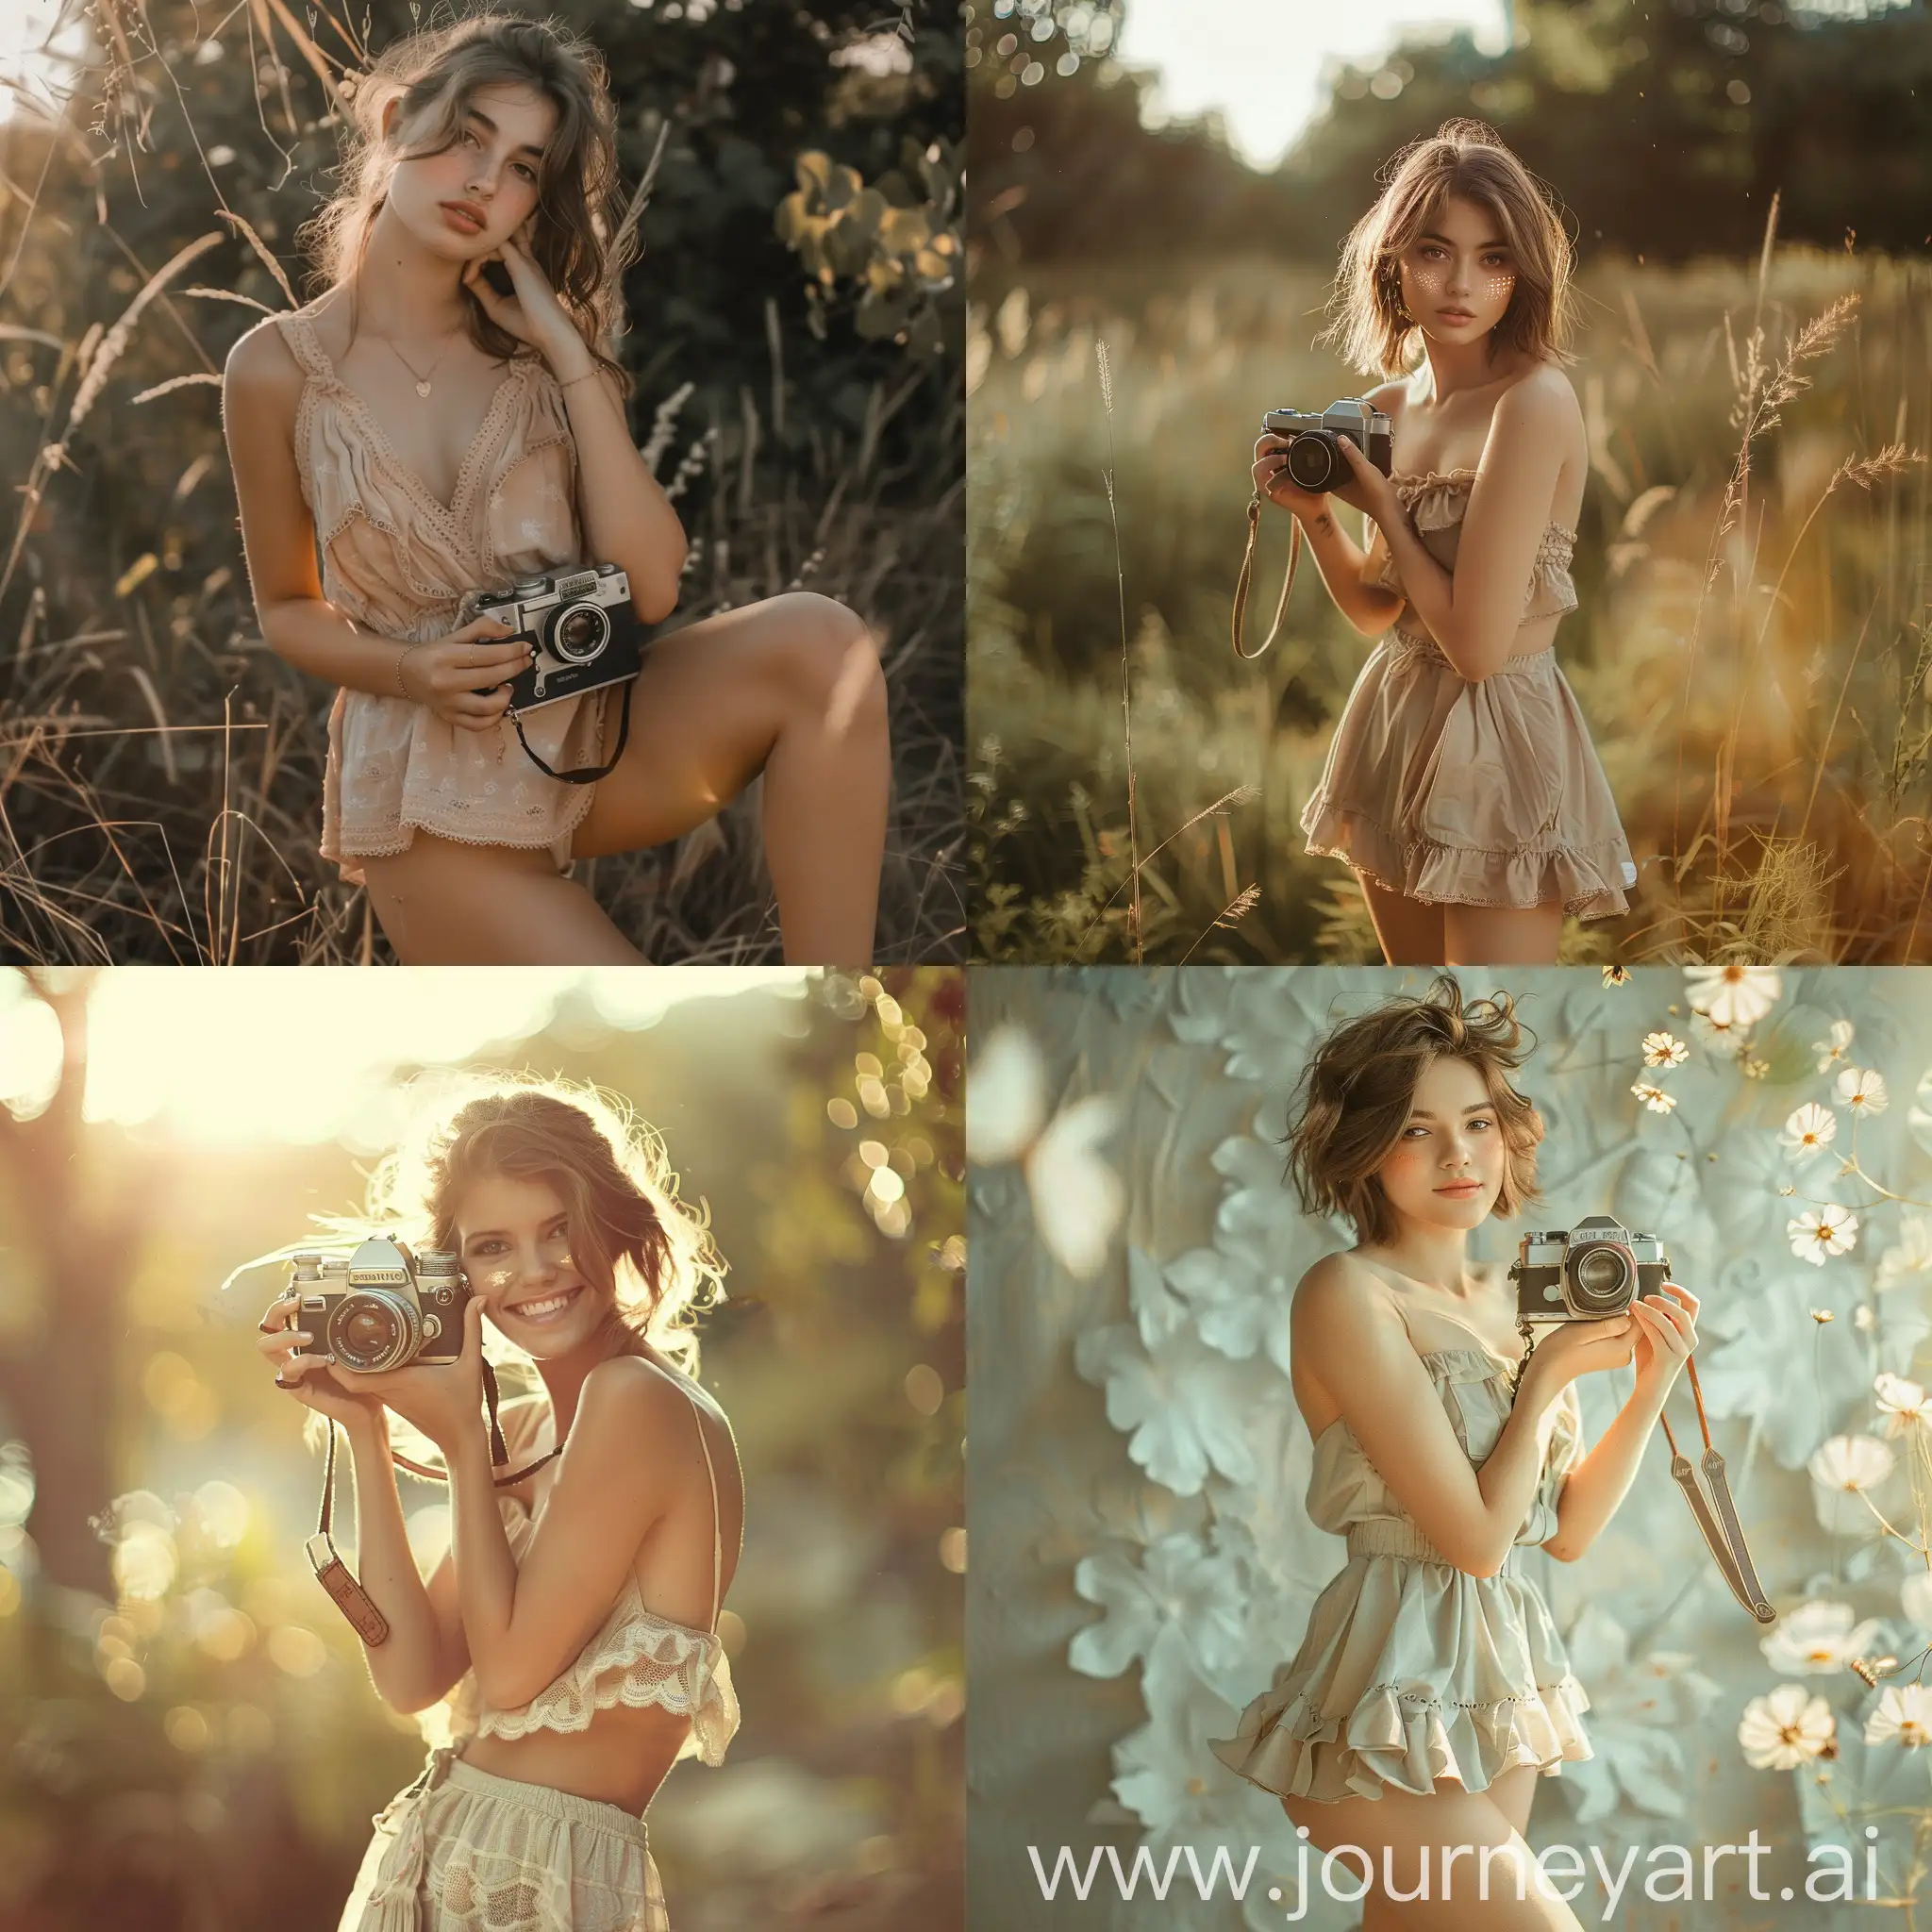 /imagine a girl with short frock and posing with camera with sun kissed cheeks